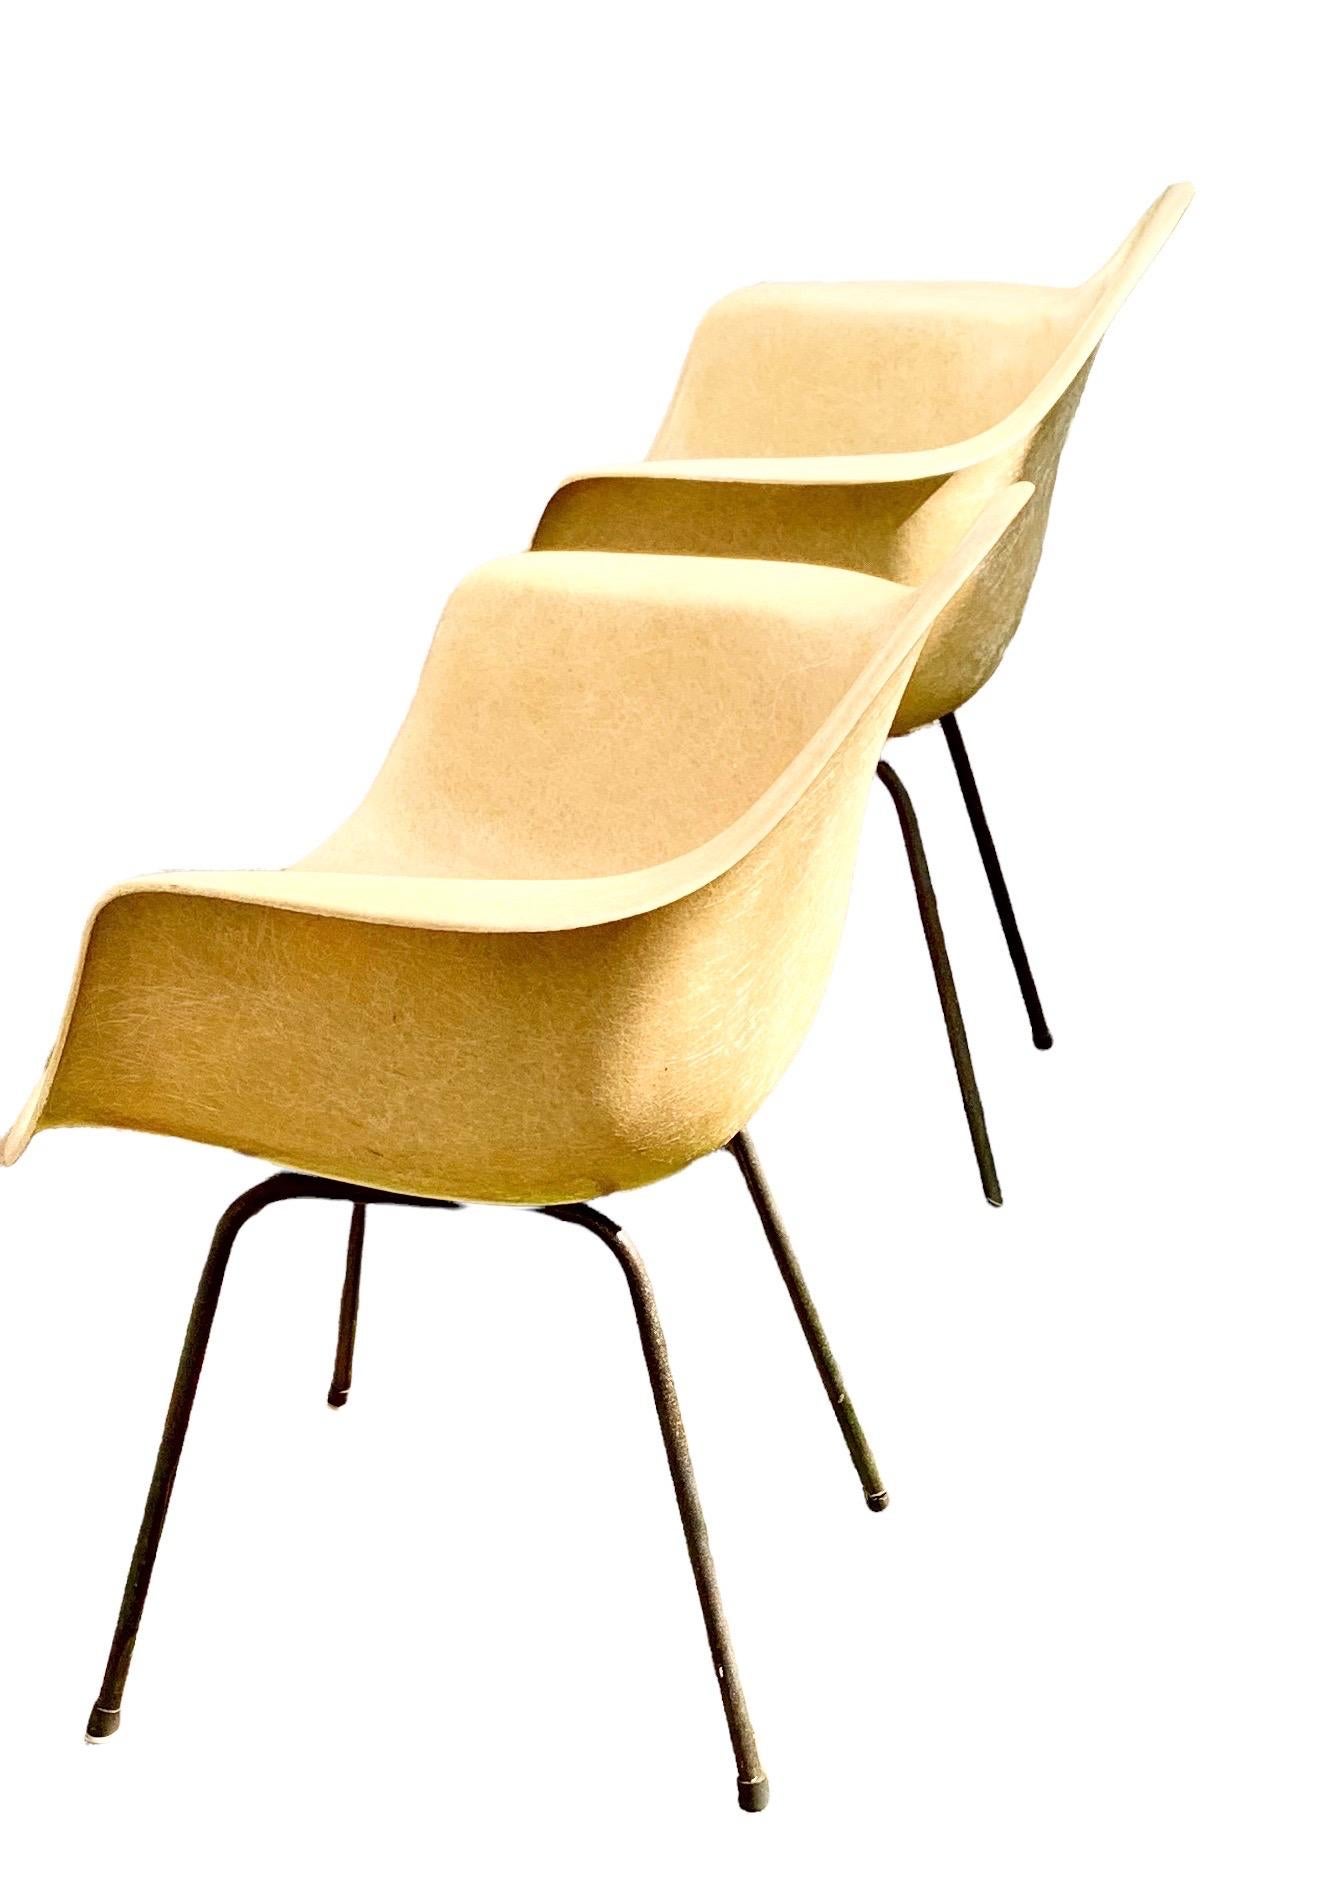 Hand-Crafted 1950's Vintage Charles Eames Fiberglass Shell Armchairs for Herman Miller-A Pair For Sale